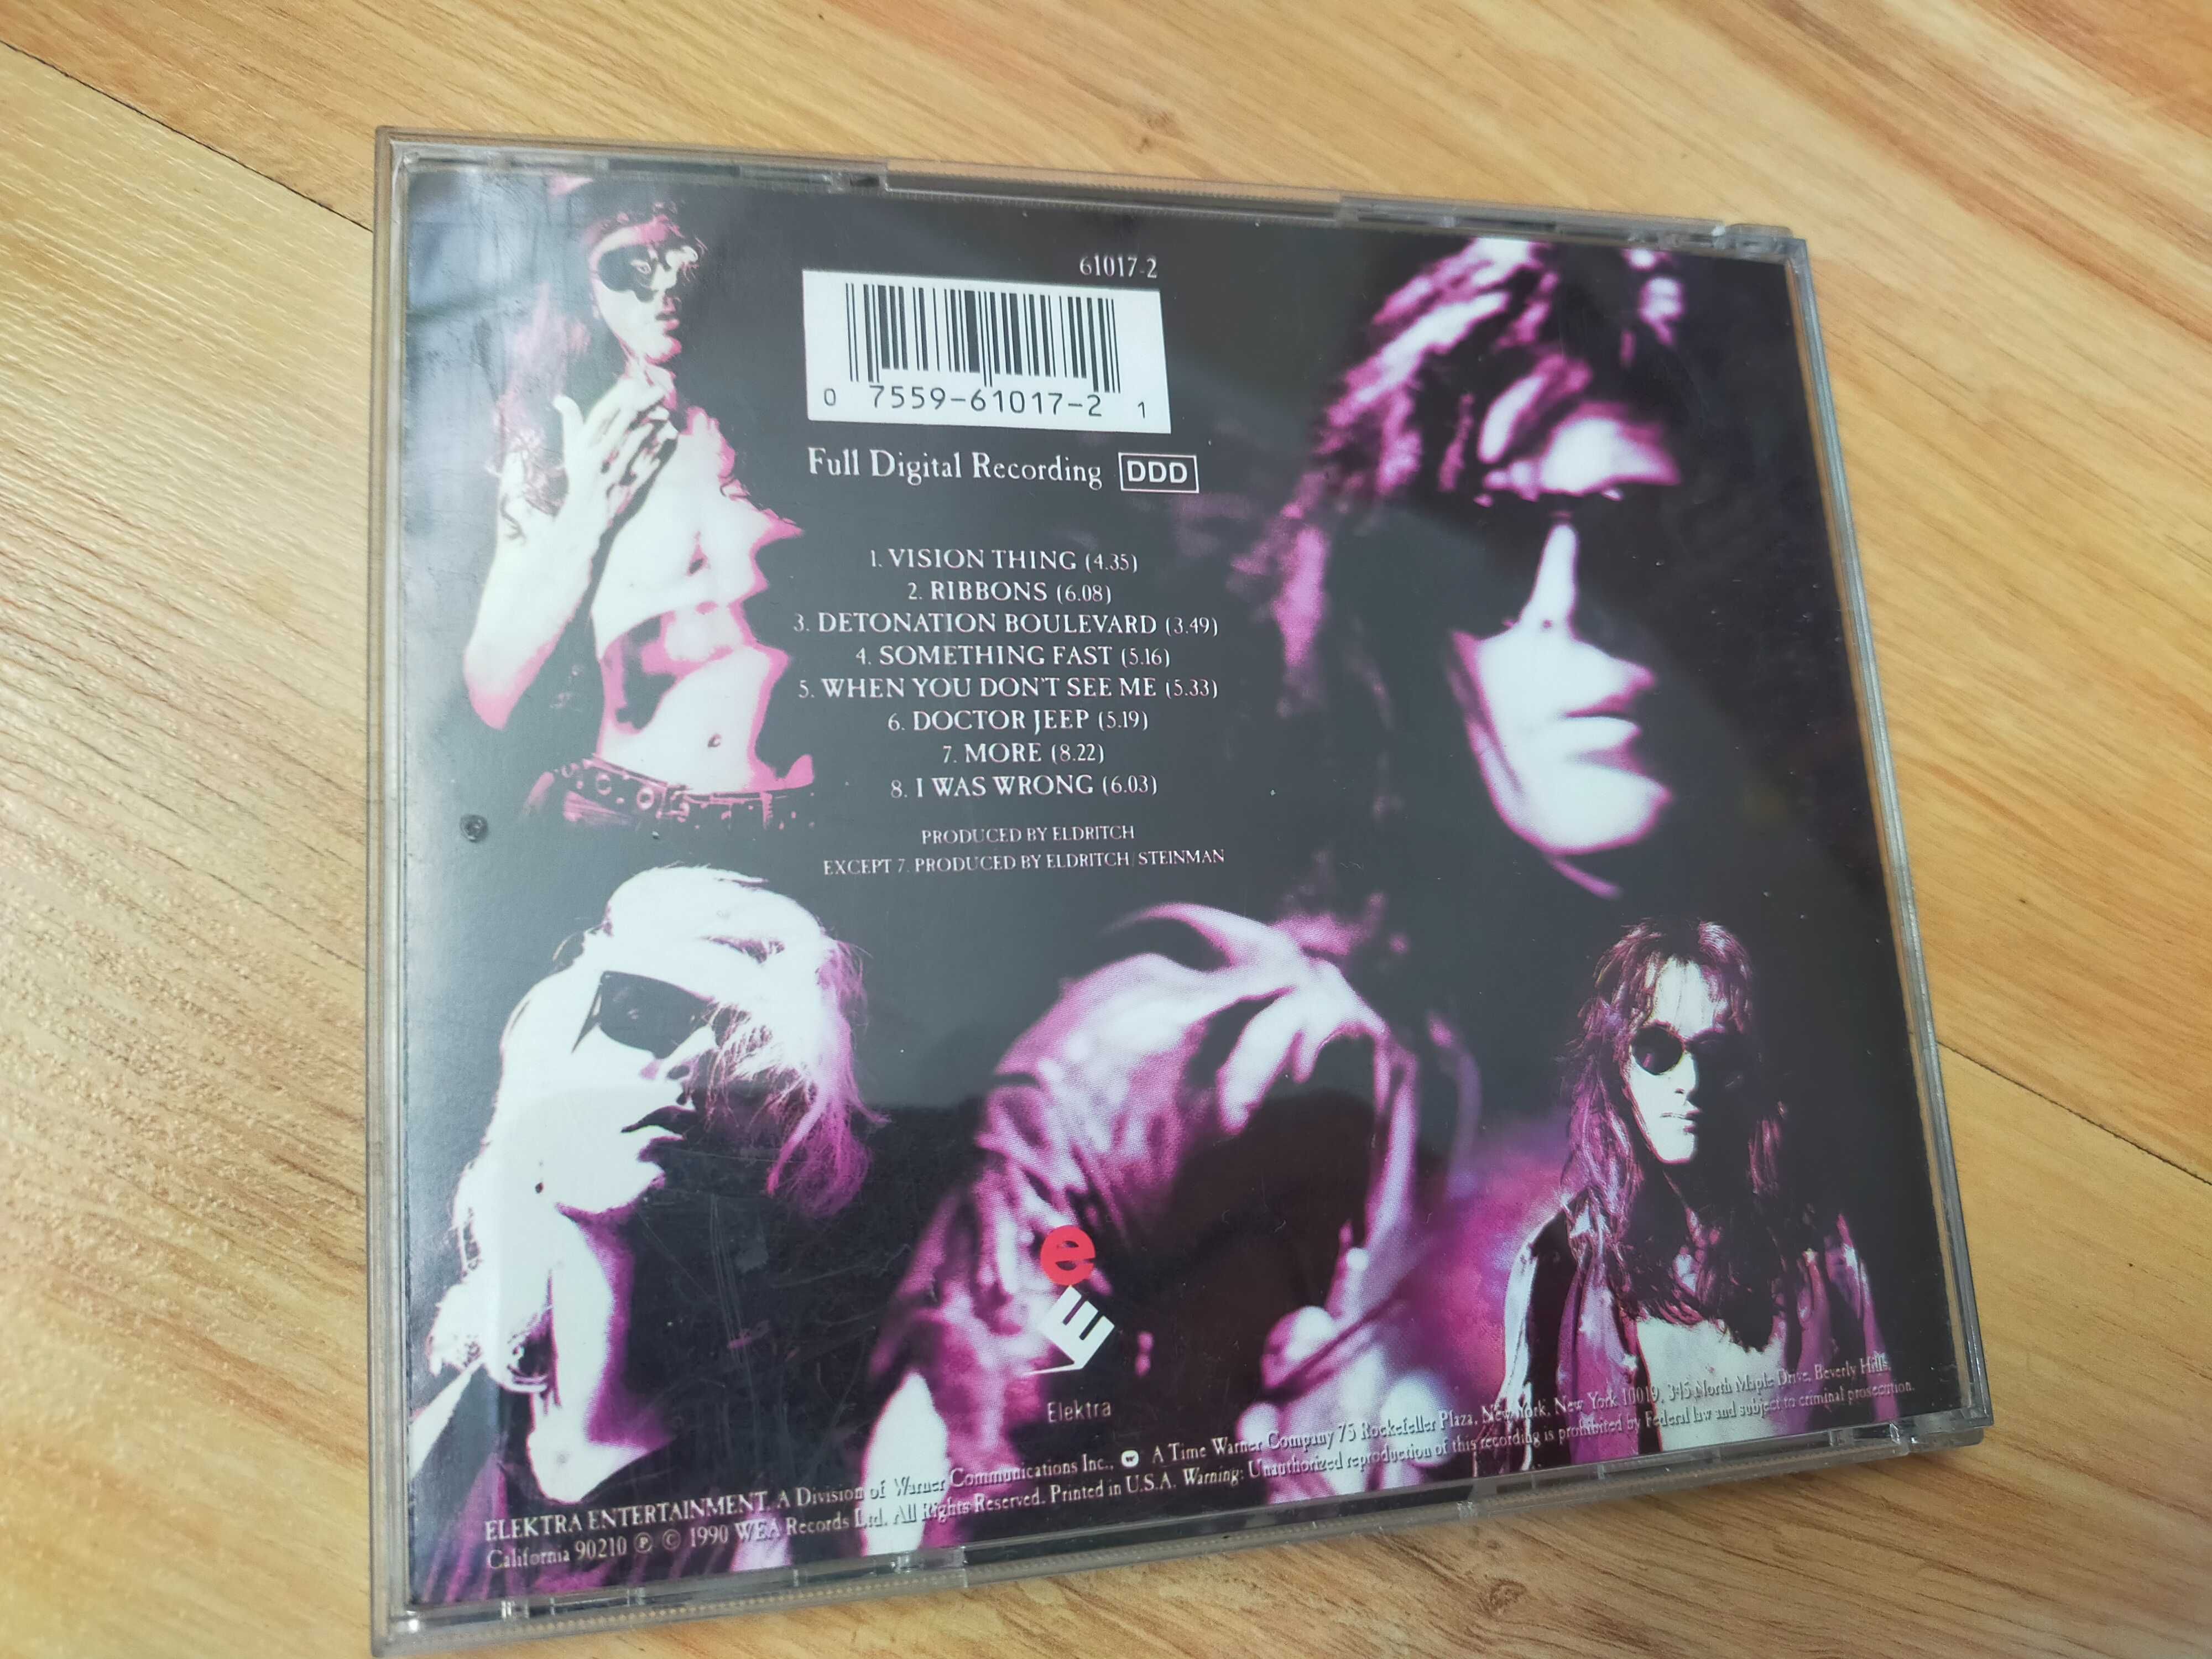 THE SISTERS OF MERCY "Vision Thing" CD. Jak nowa ! Wyd. USA